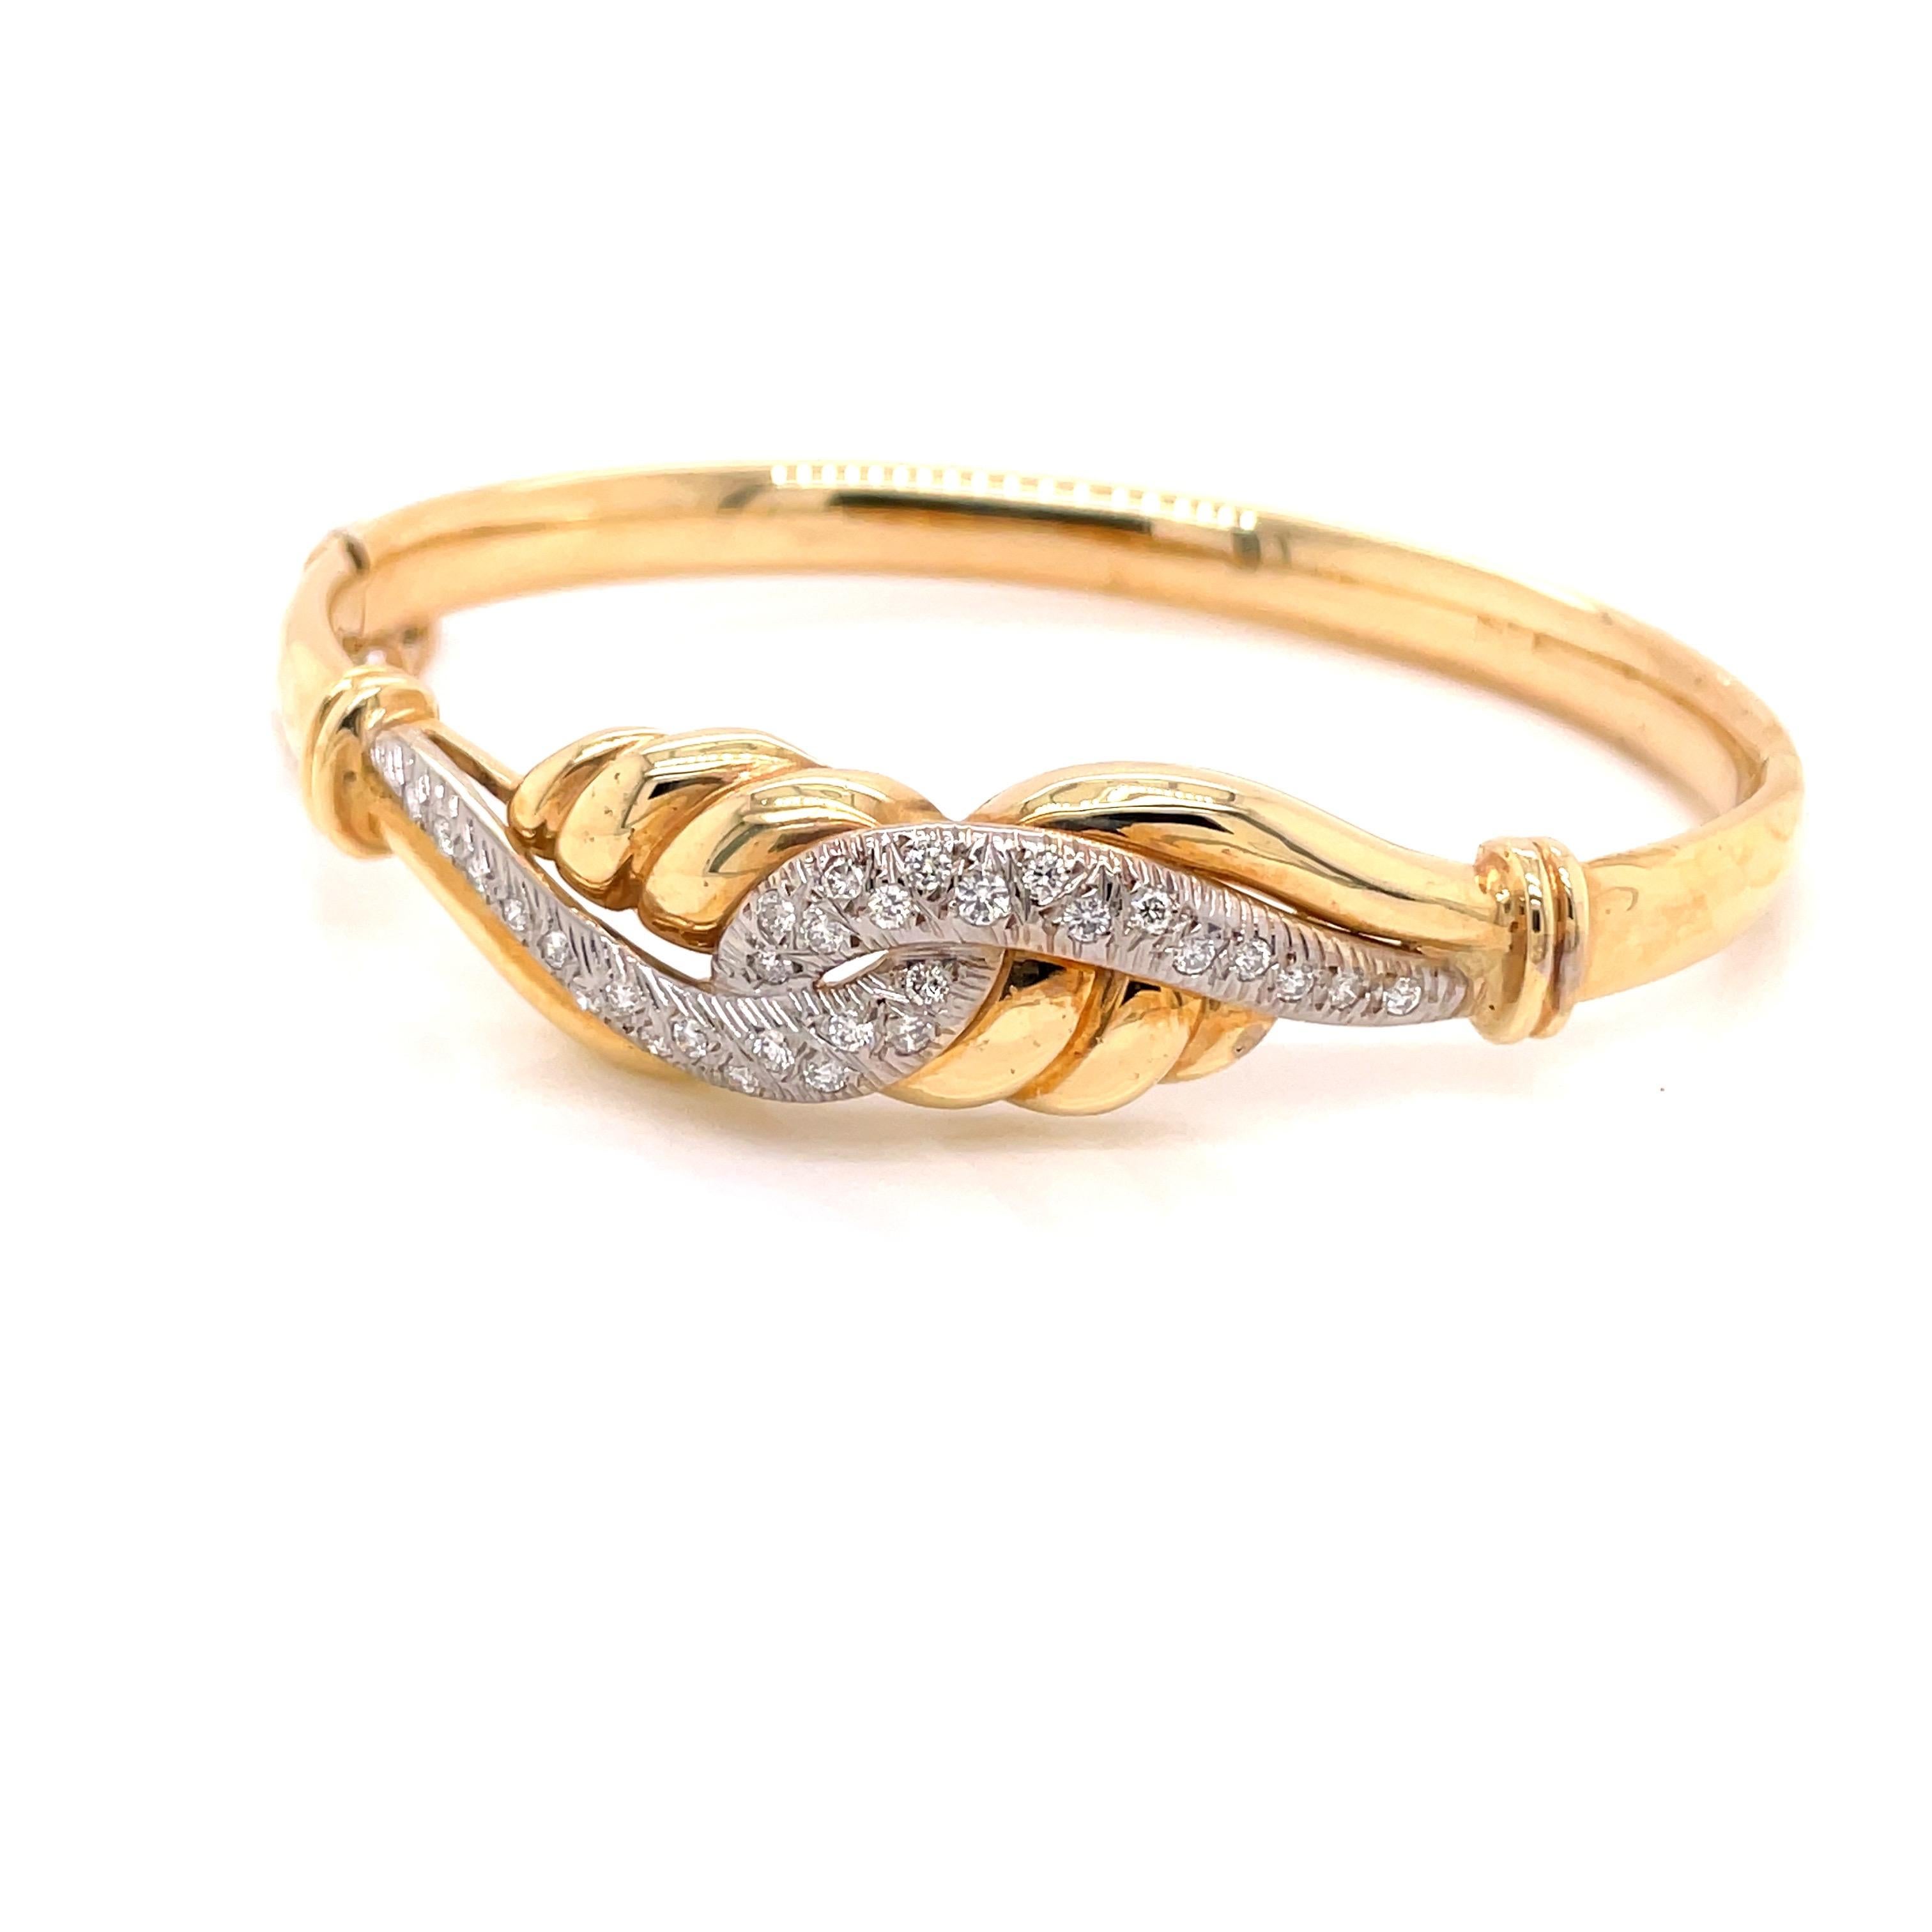 14K 2-Tone Gold Diamond Embrace Bangle Bracelet .50ct - The bangle is set with 30 round brilliant diamonds in white gold weighing approximately .50ct with G - H color and SI clarity. The width of the bangle is 14mm on top and tapers to 5.9mm on the